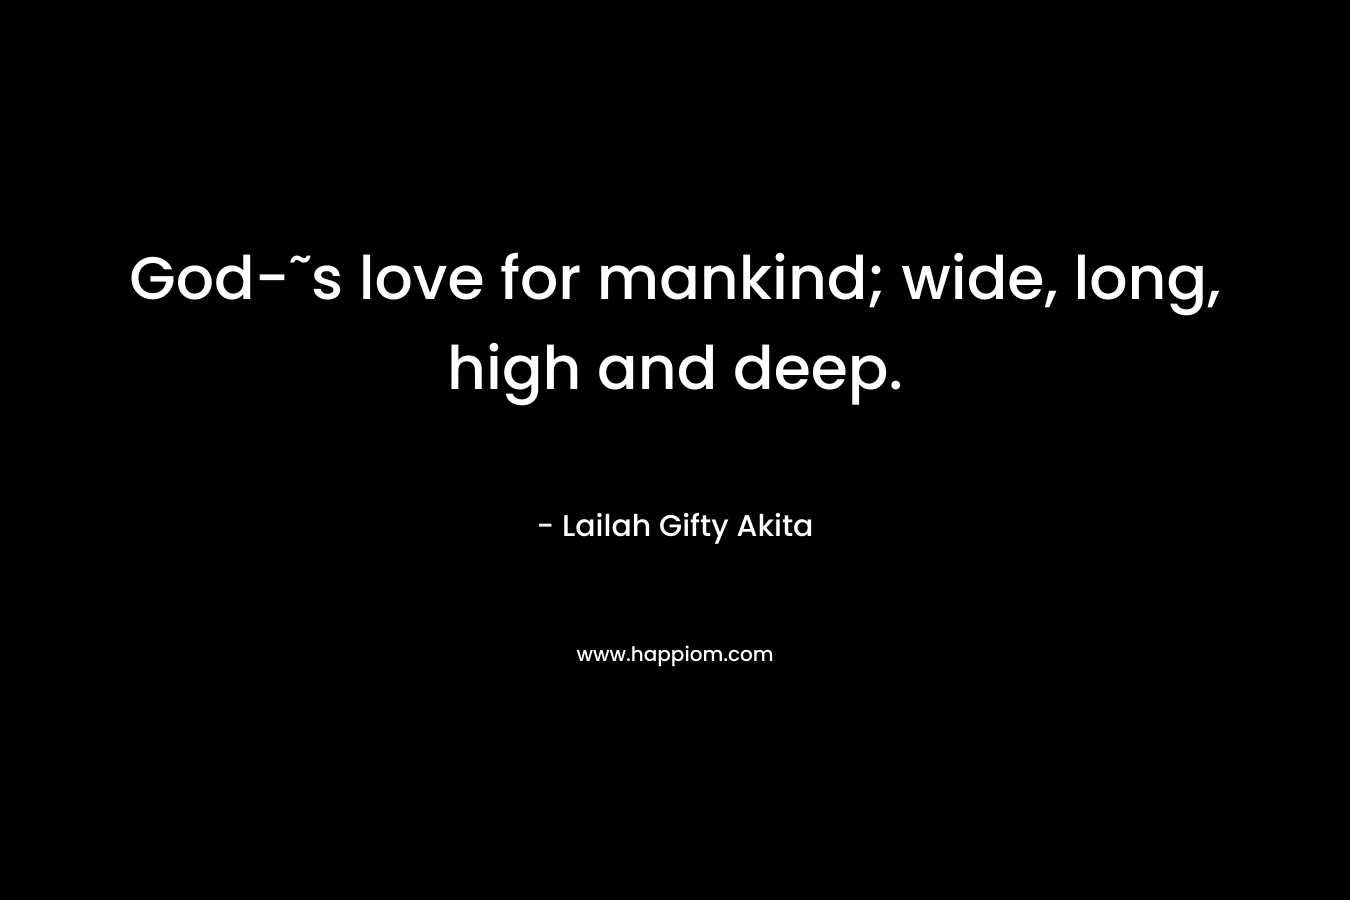 God-˜s love for mankind; wide, long, high and deep.